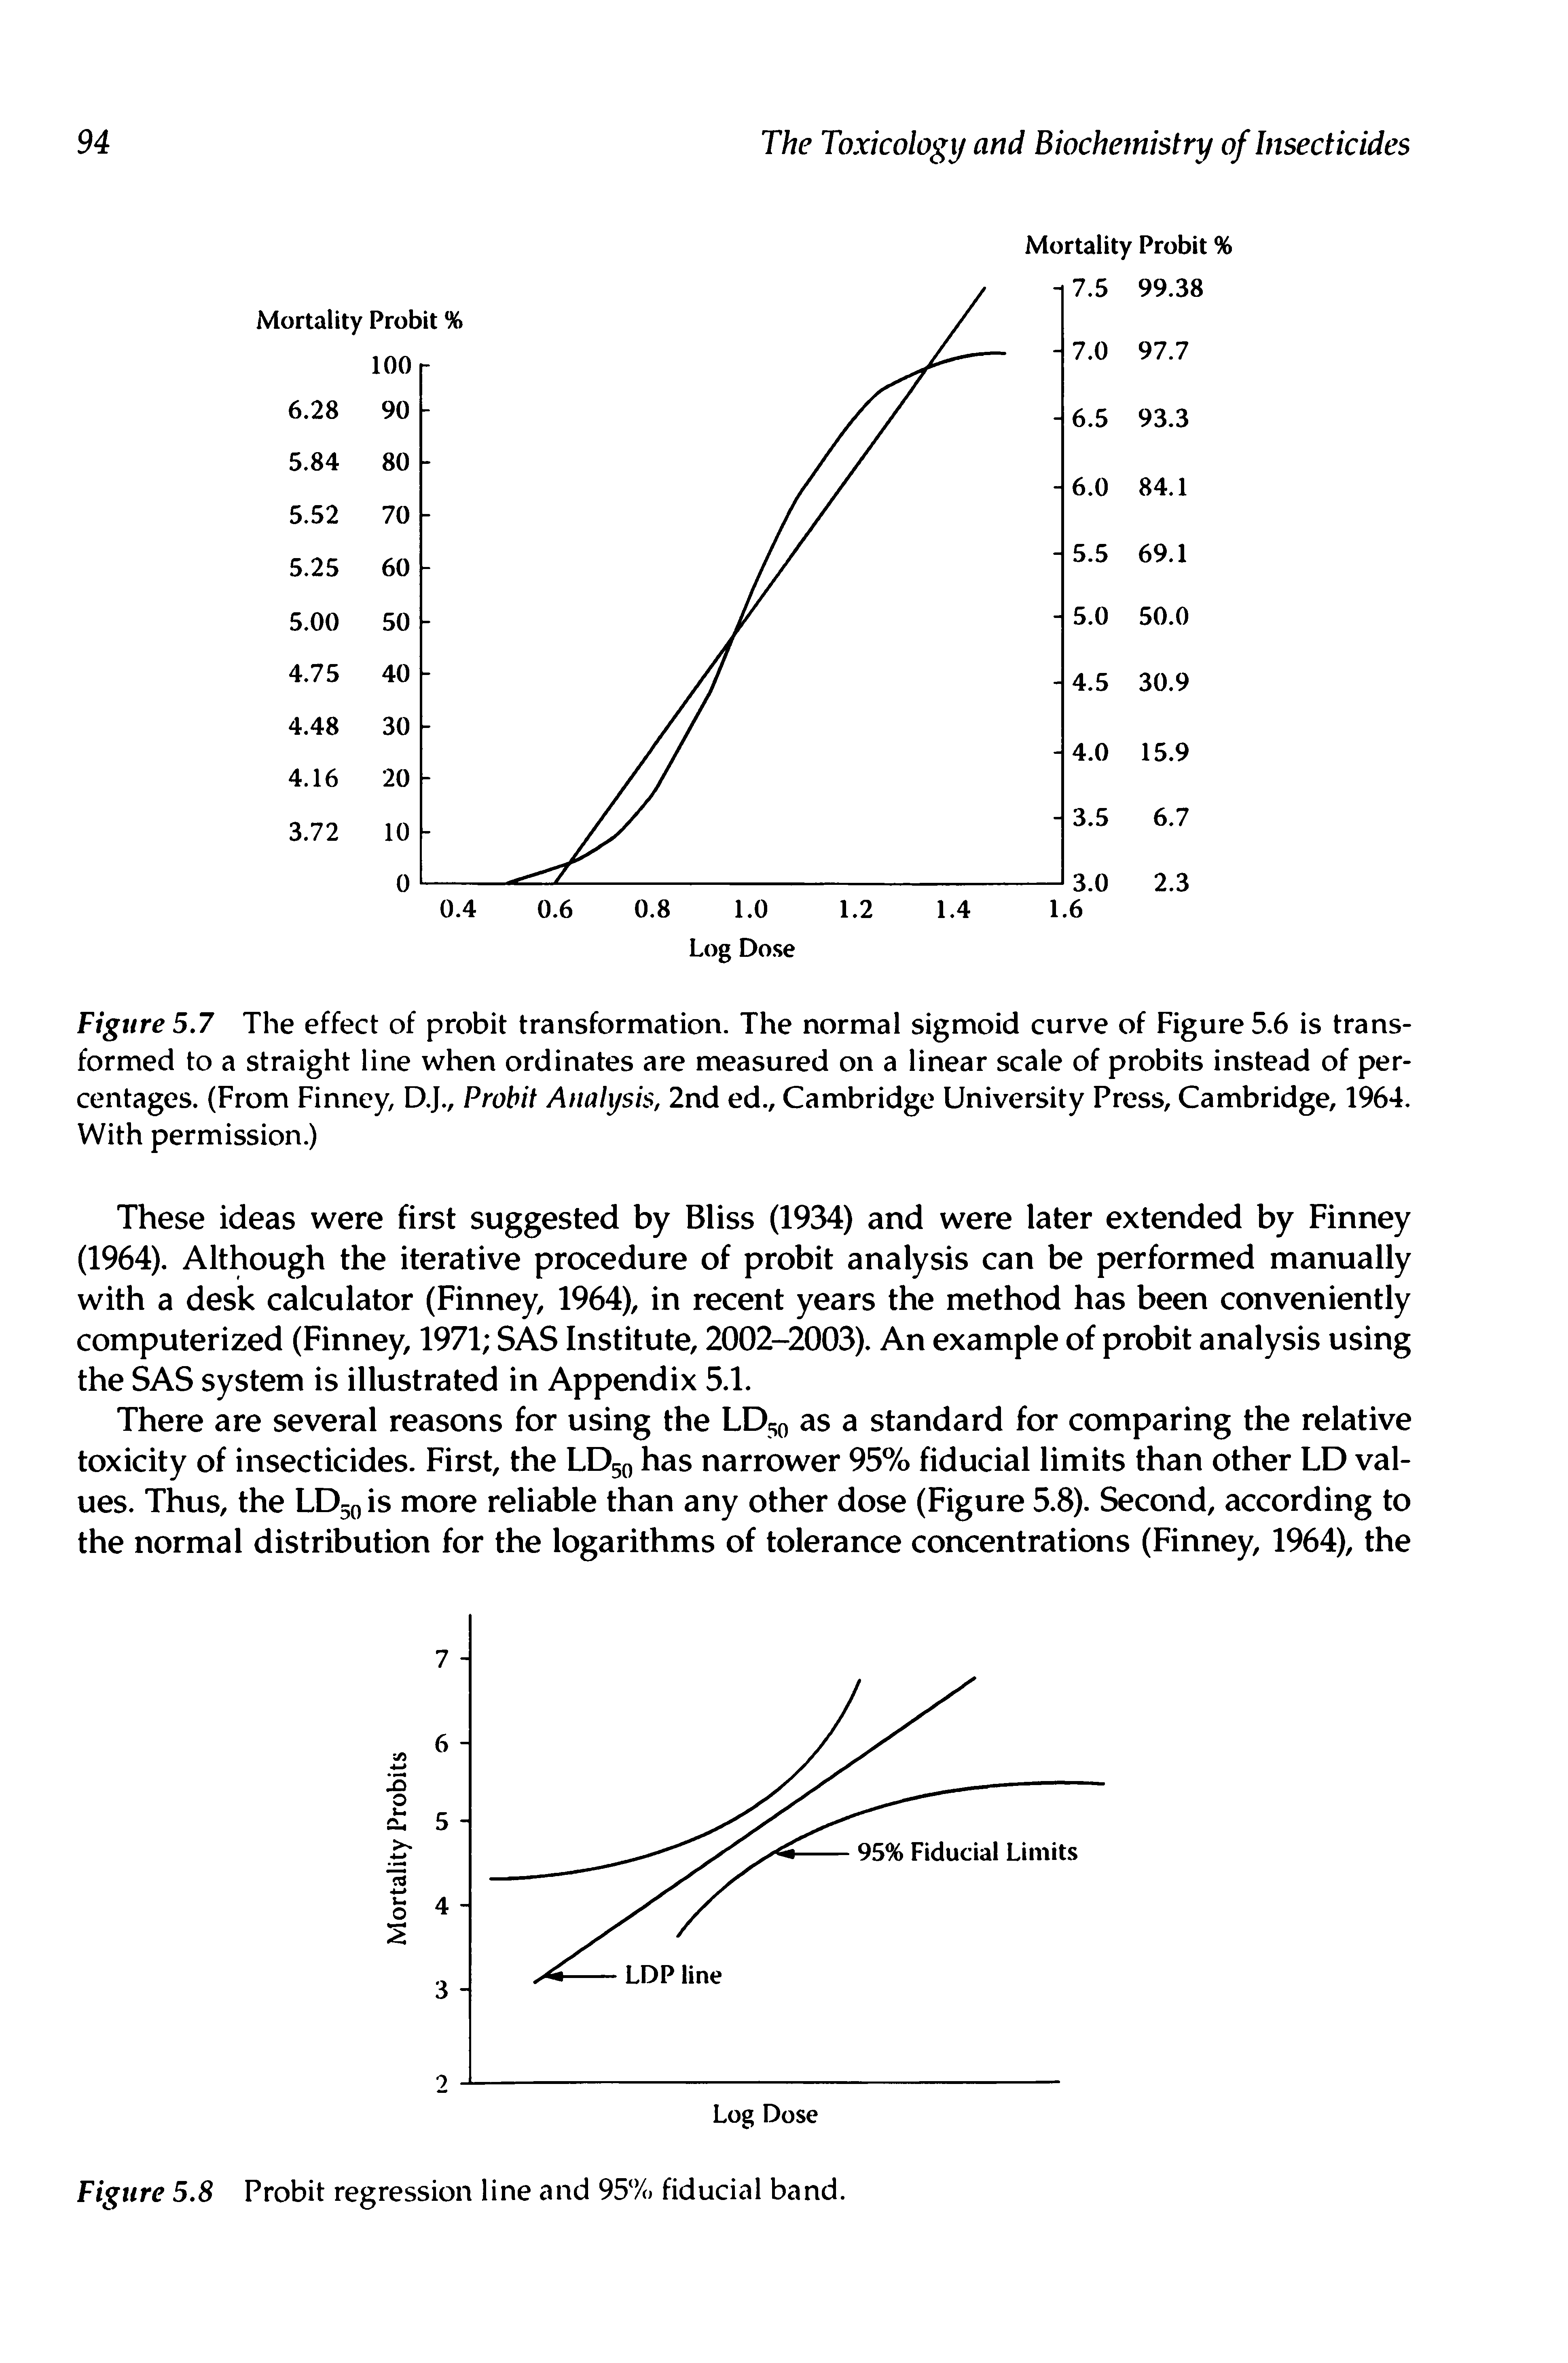 Figure 5.7 The effect of probit transformation. The normal sigmoid curve of Figure 5.6 is transformed to a straight line when ordinates are measured on a linear scale of probits instead of percentages. (From Finney, D.J., Probit Analysis, 2nd ed., Cambridge University Press, Cambridge, 1964. With permission.)...